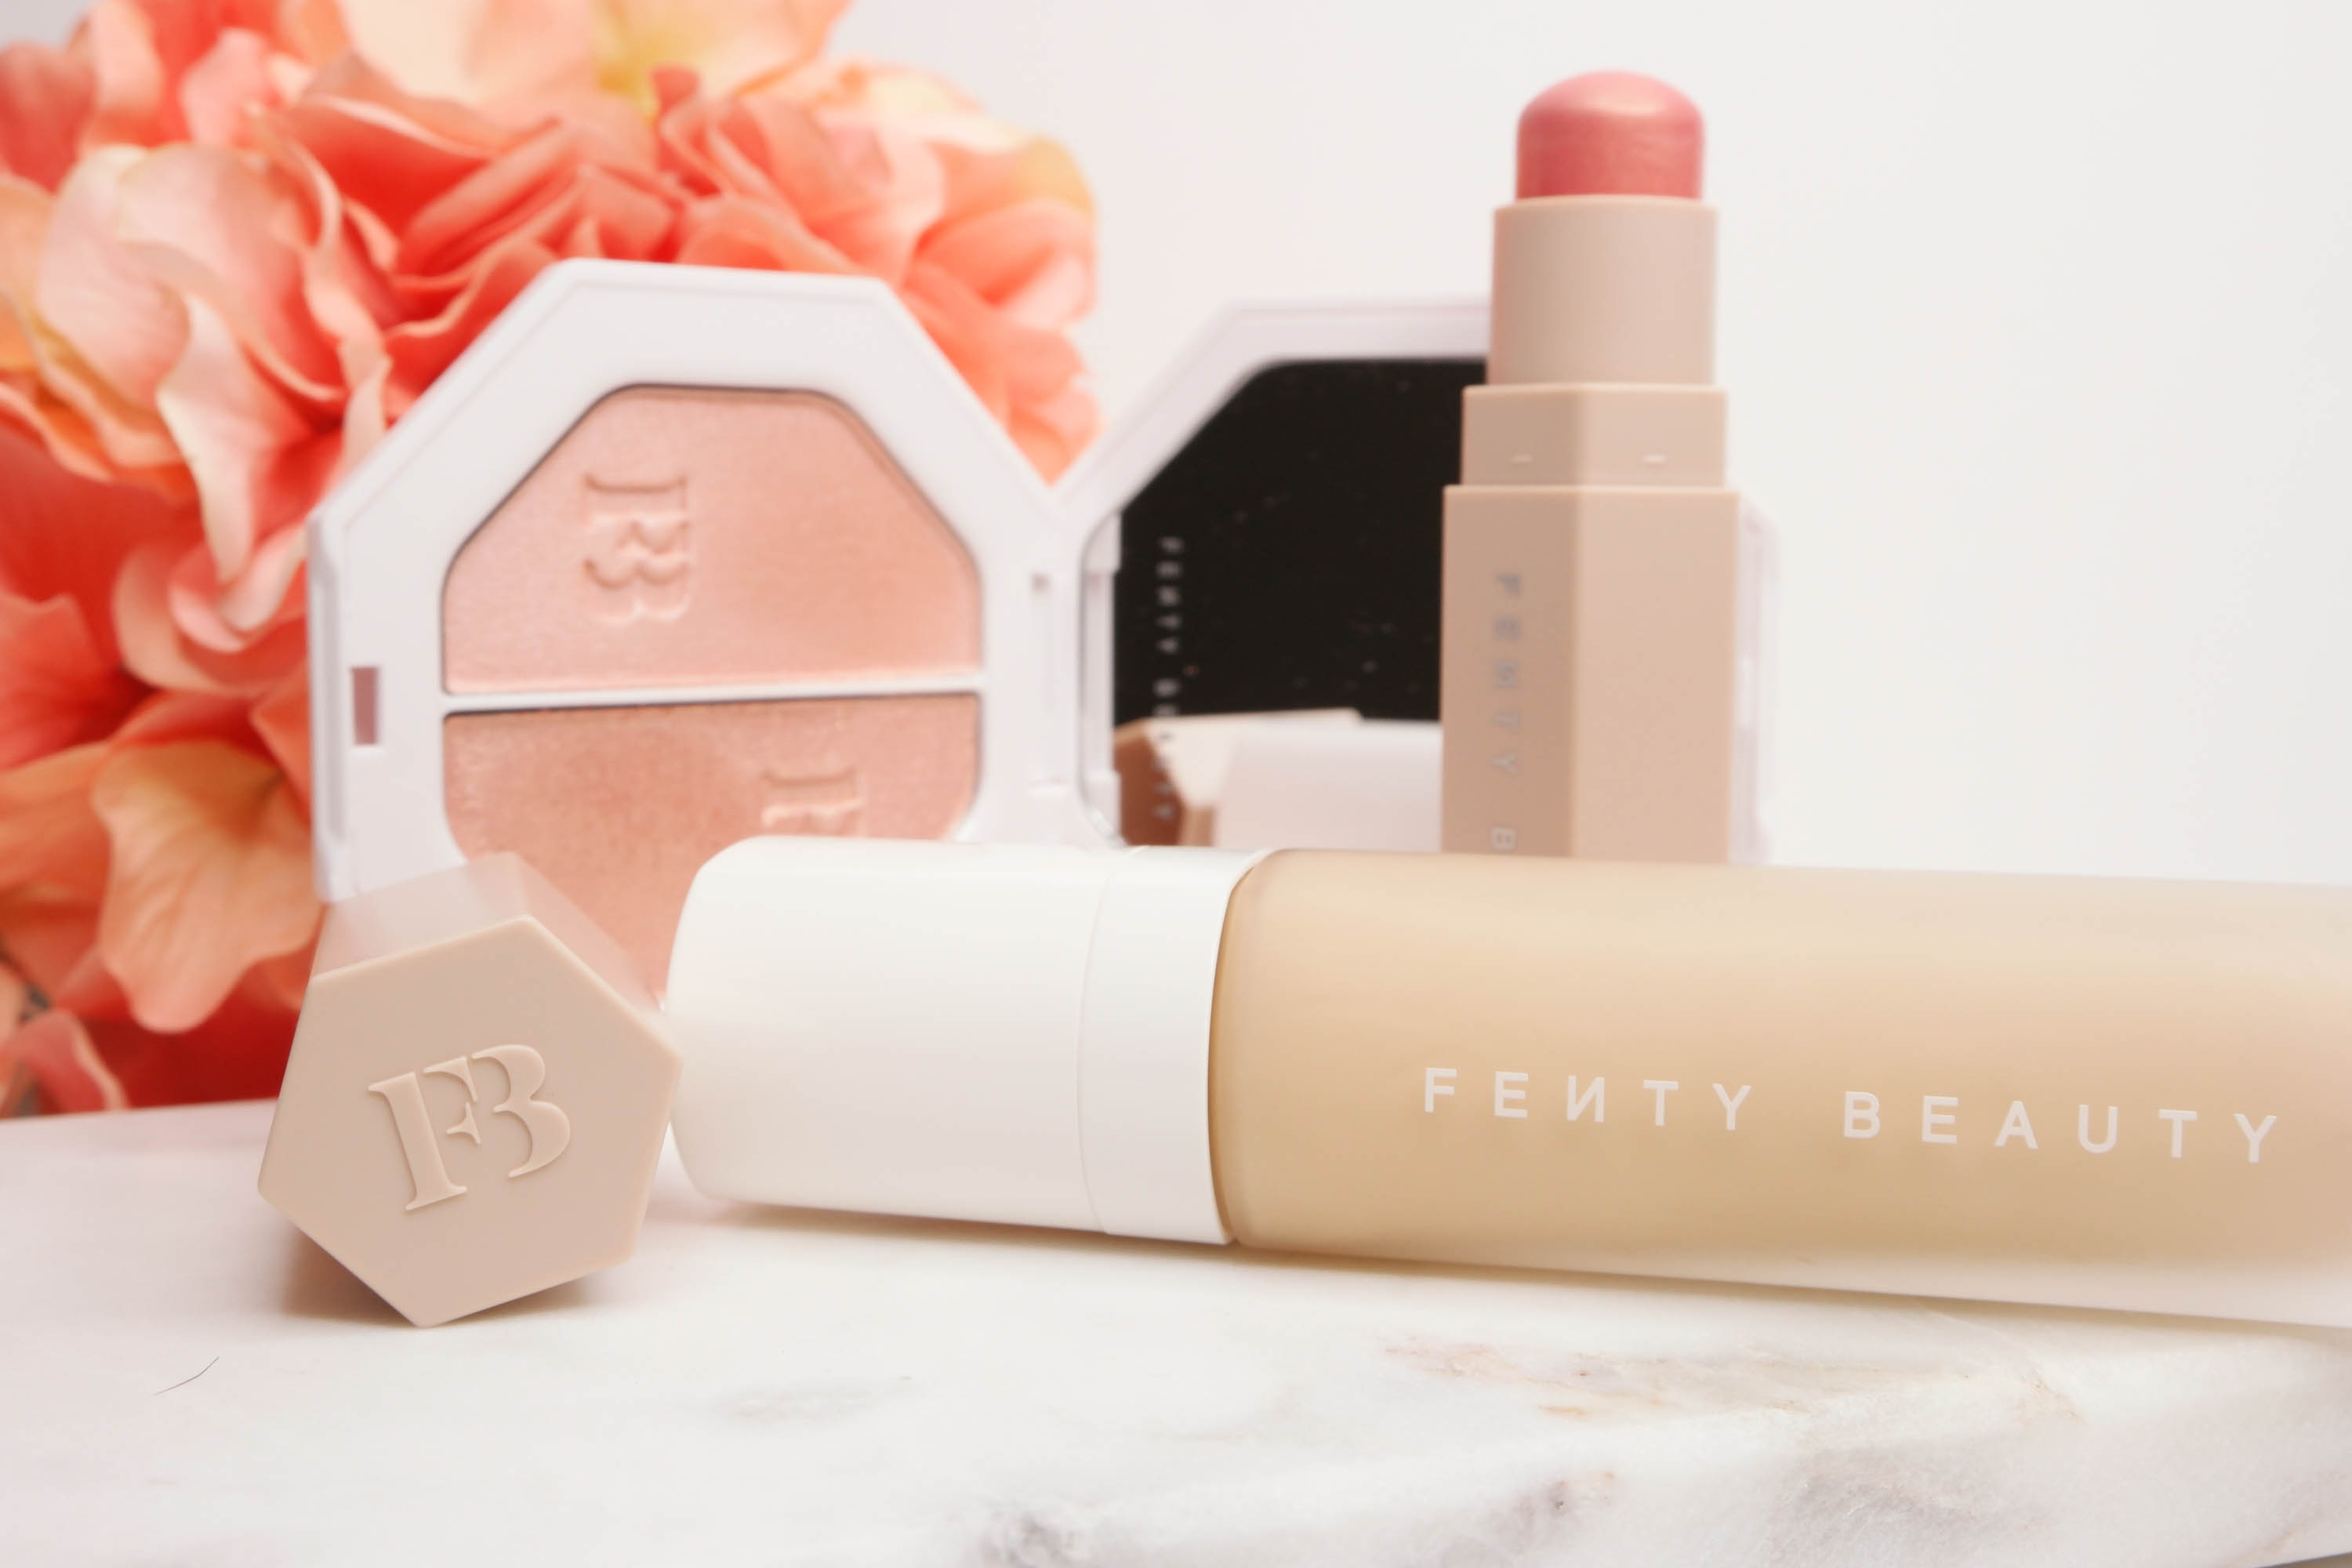 Fenty Beauty First Impression: This Is The Ultimate Glow